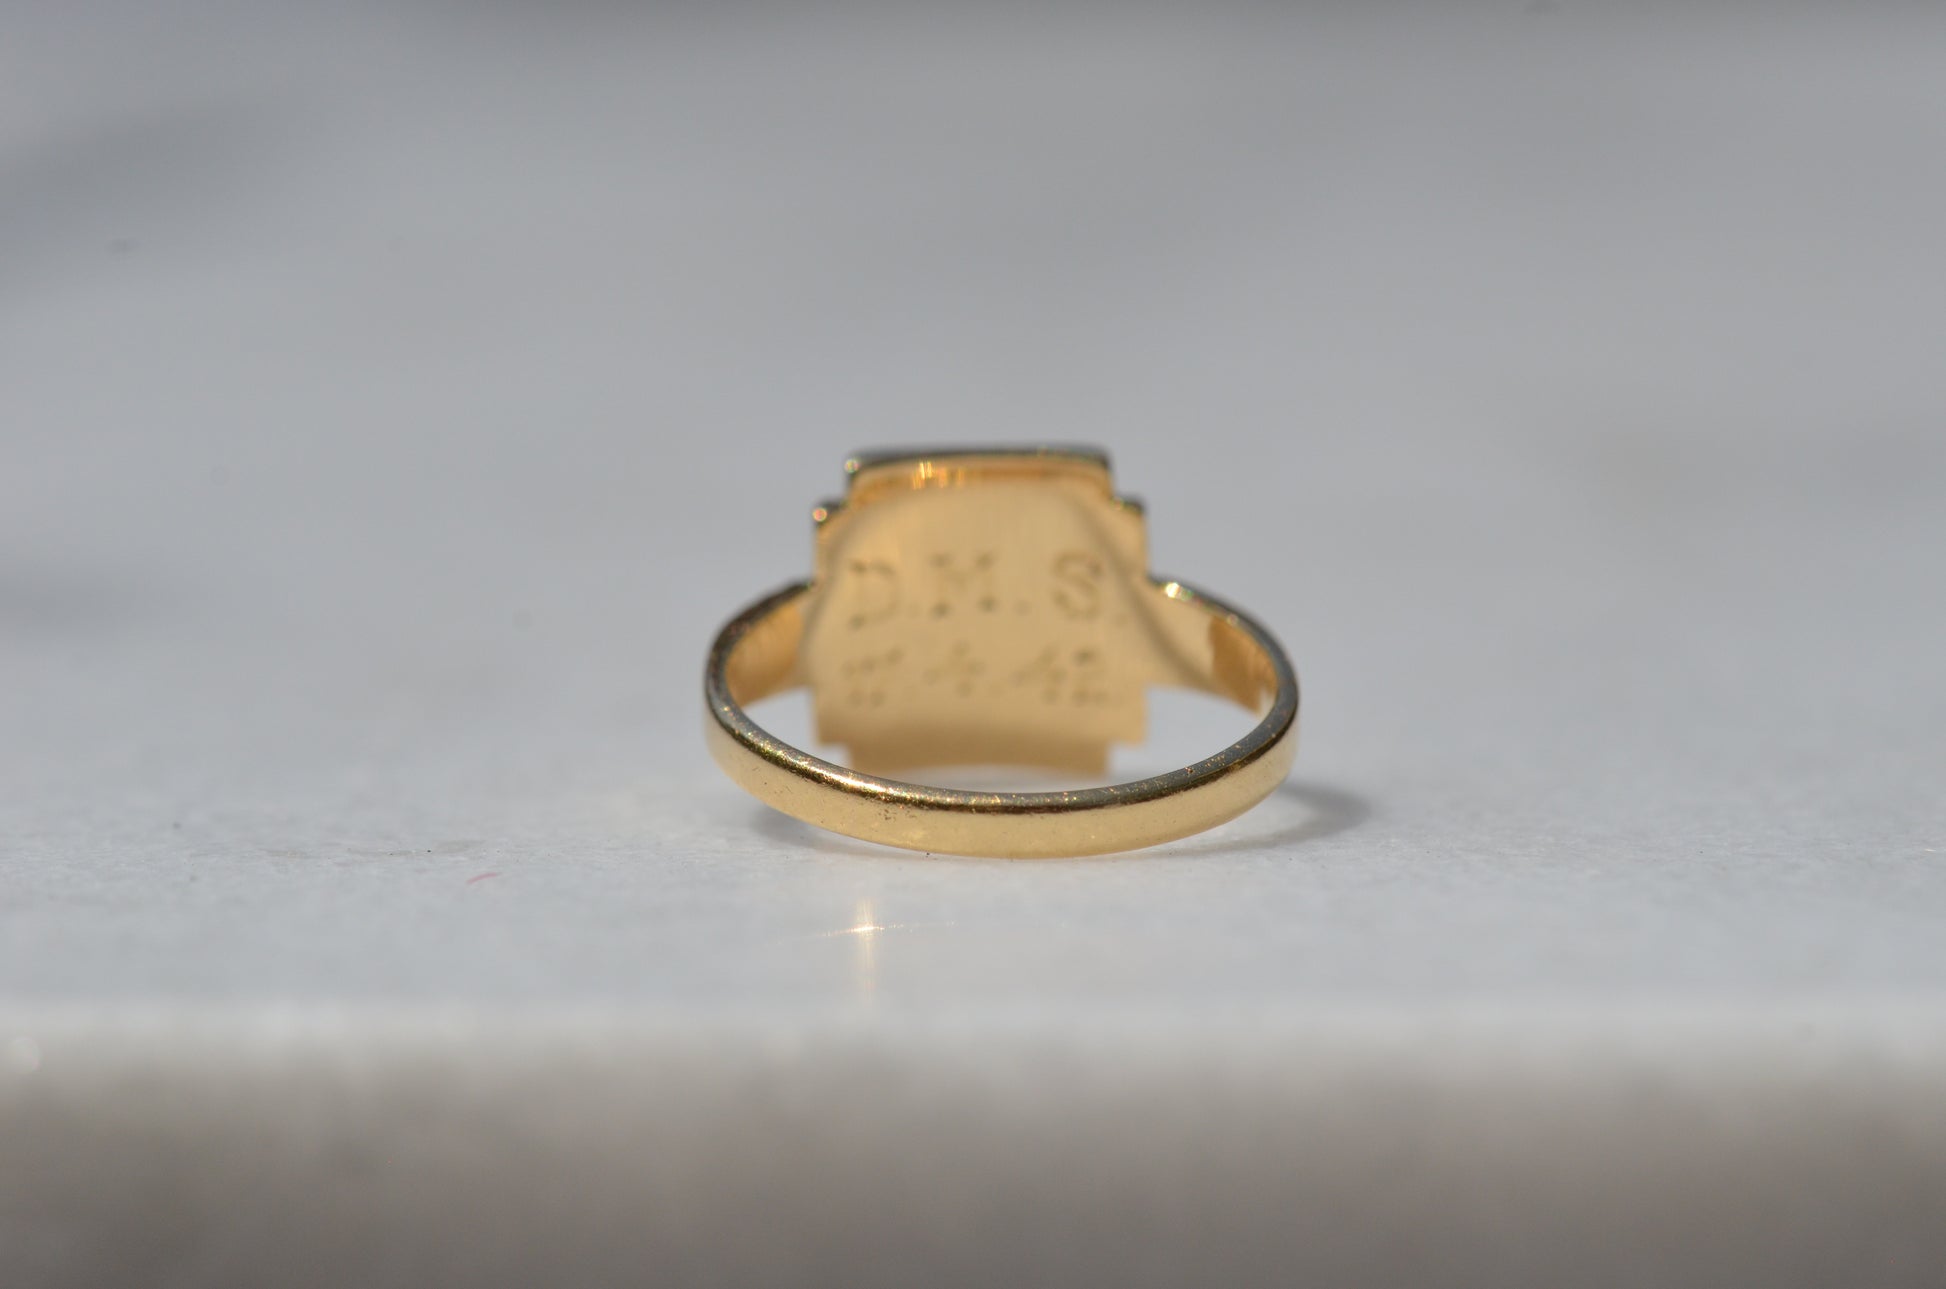 The ring is viewed from the back, with the band in focus, and minor evidence of past resizing in the form of a small patch of pitting on a solder seam.